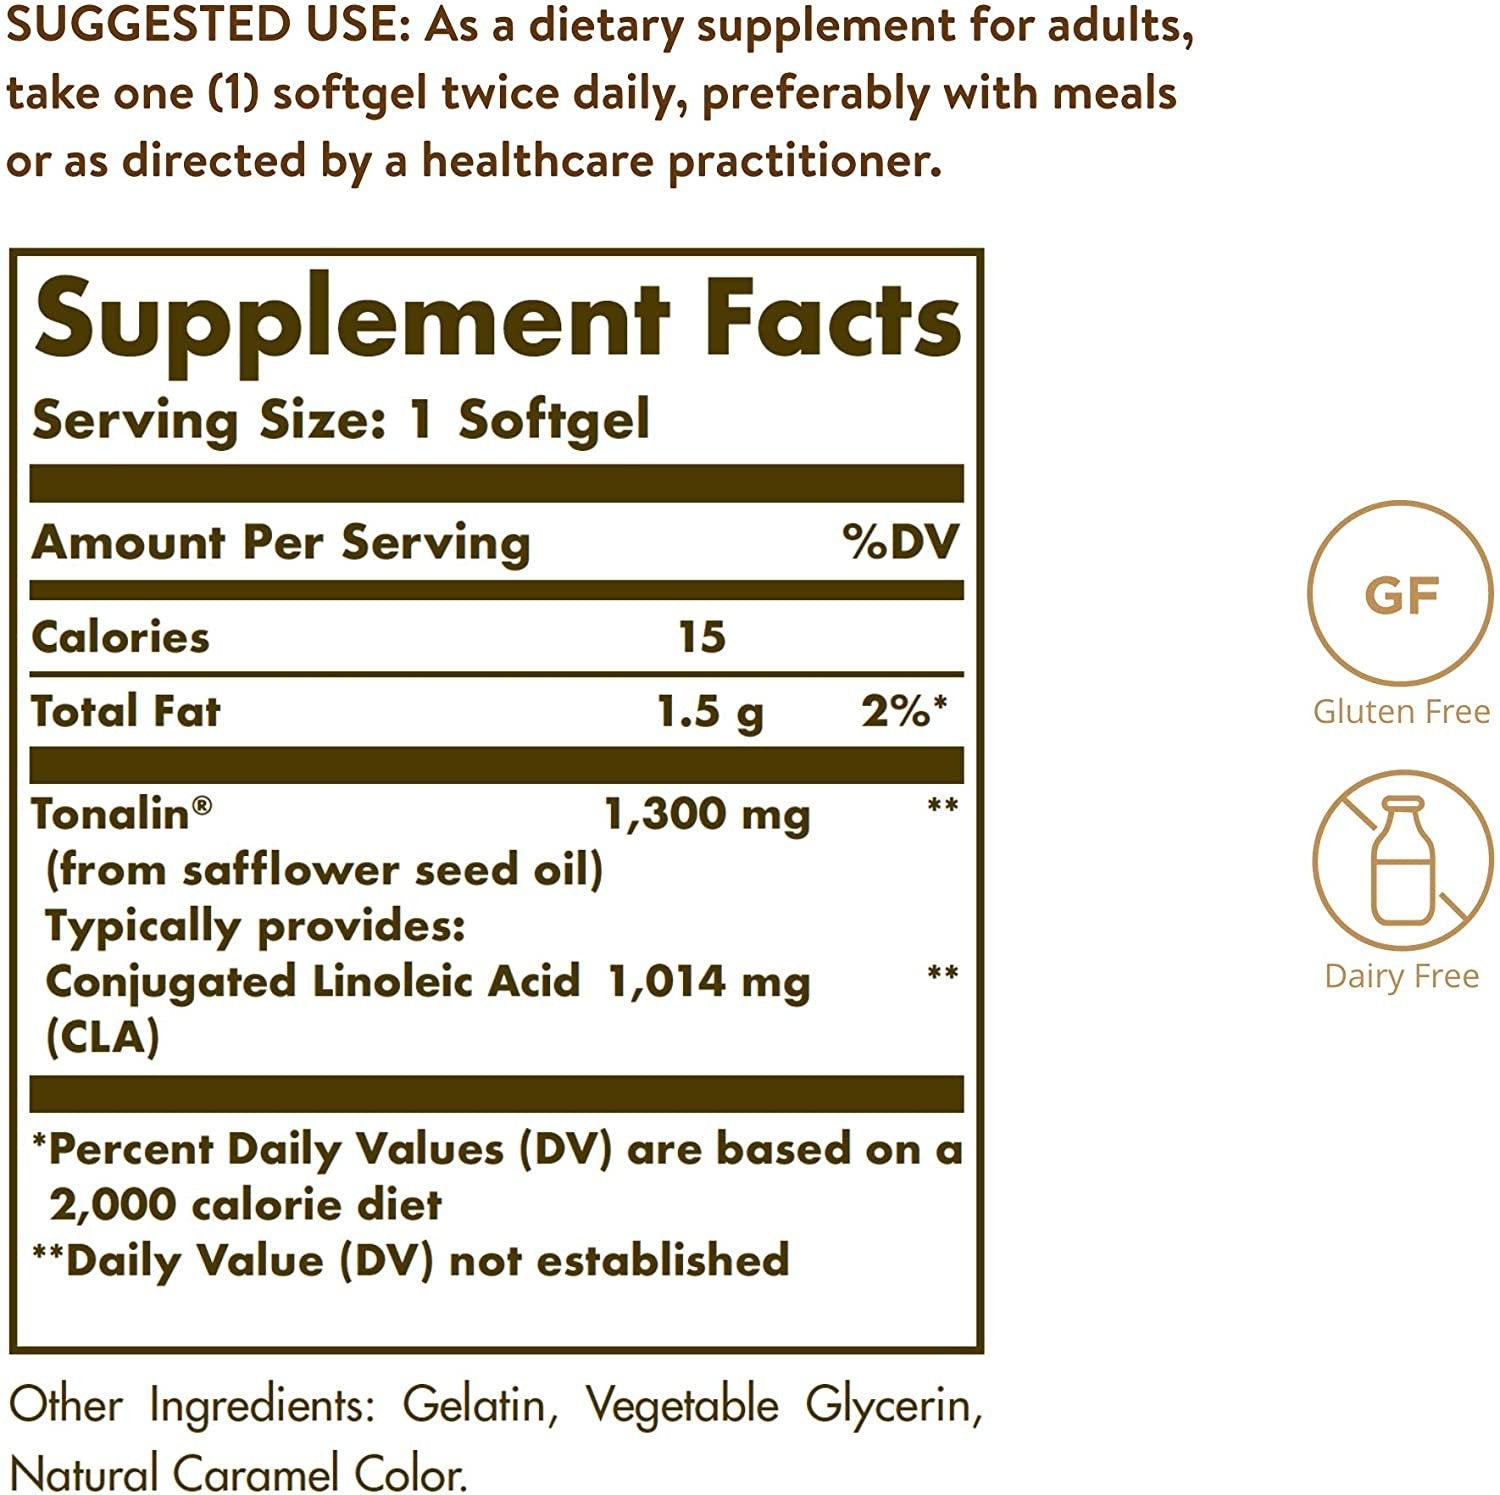 Solgar Tonalin CLA 1300 mg, 60 Softgels - Essential Omega-6 Fatty Acid - Derived from Non-GMO Safflower Seed Oil - Gluten Free, Dairy Free - 60 Servings